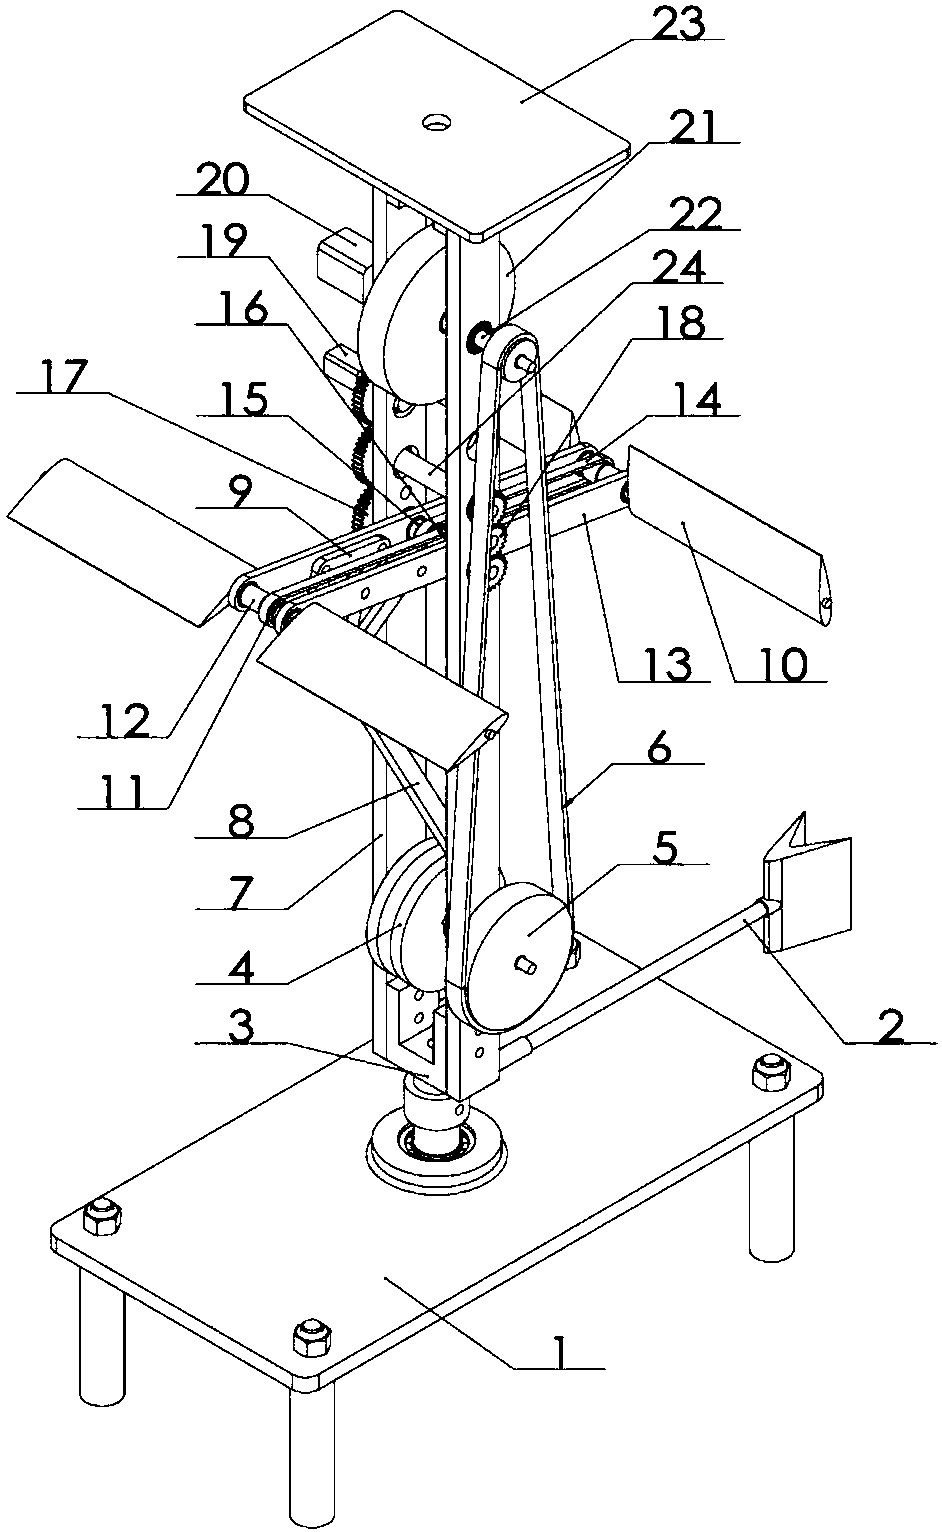 Swing wing ocean current power generation device